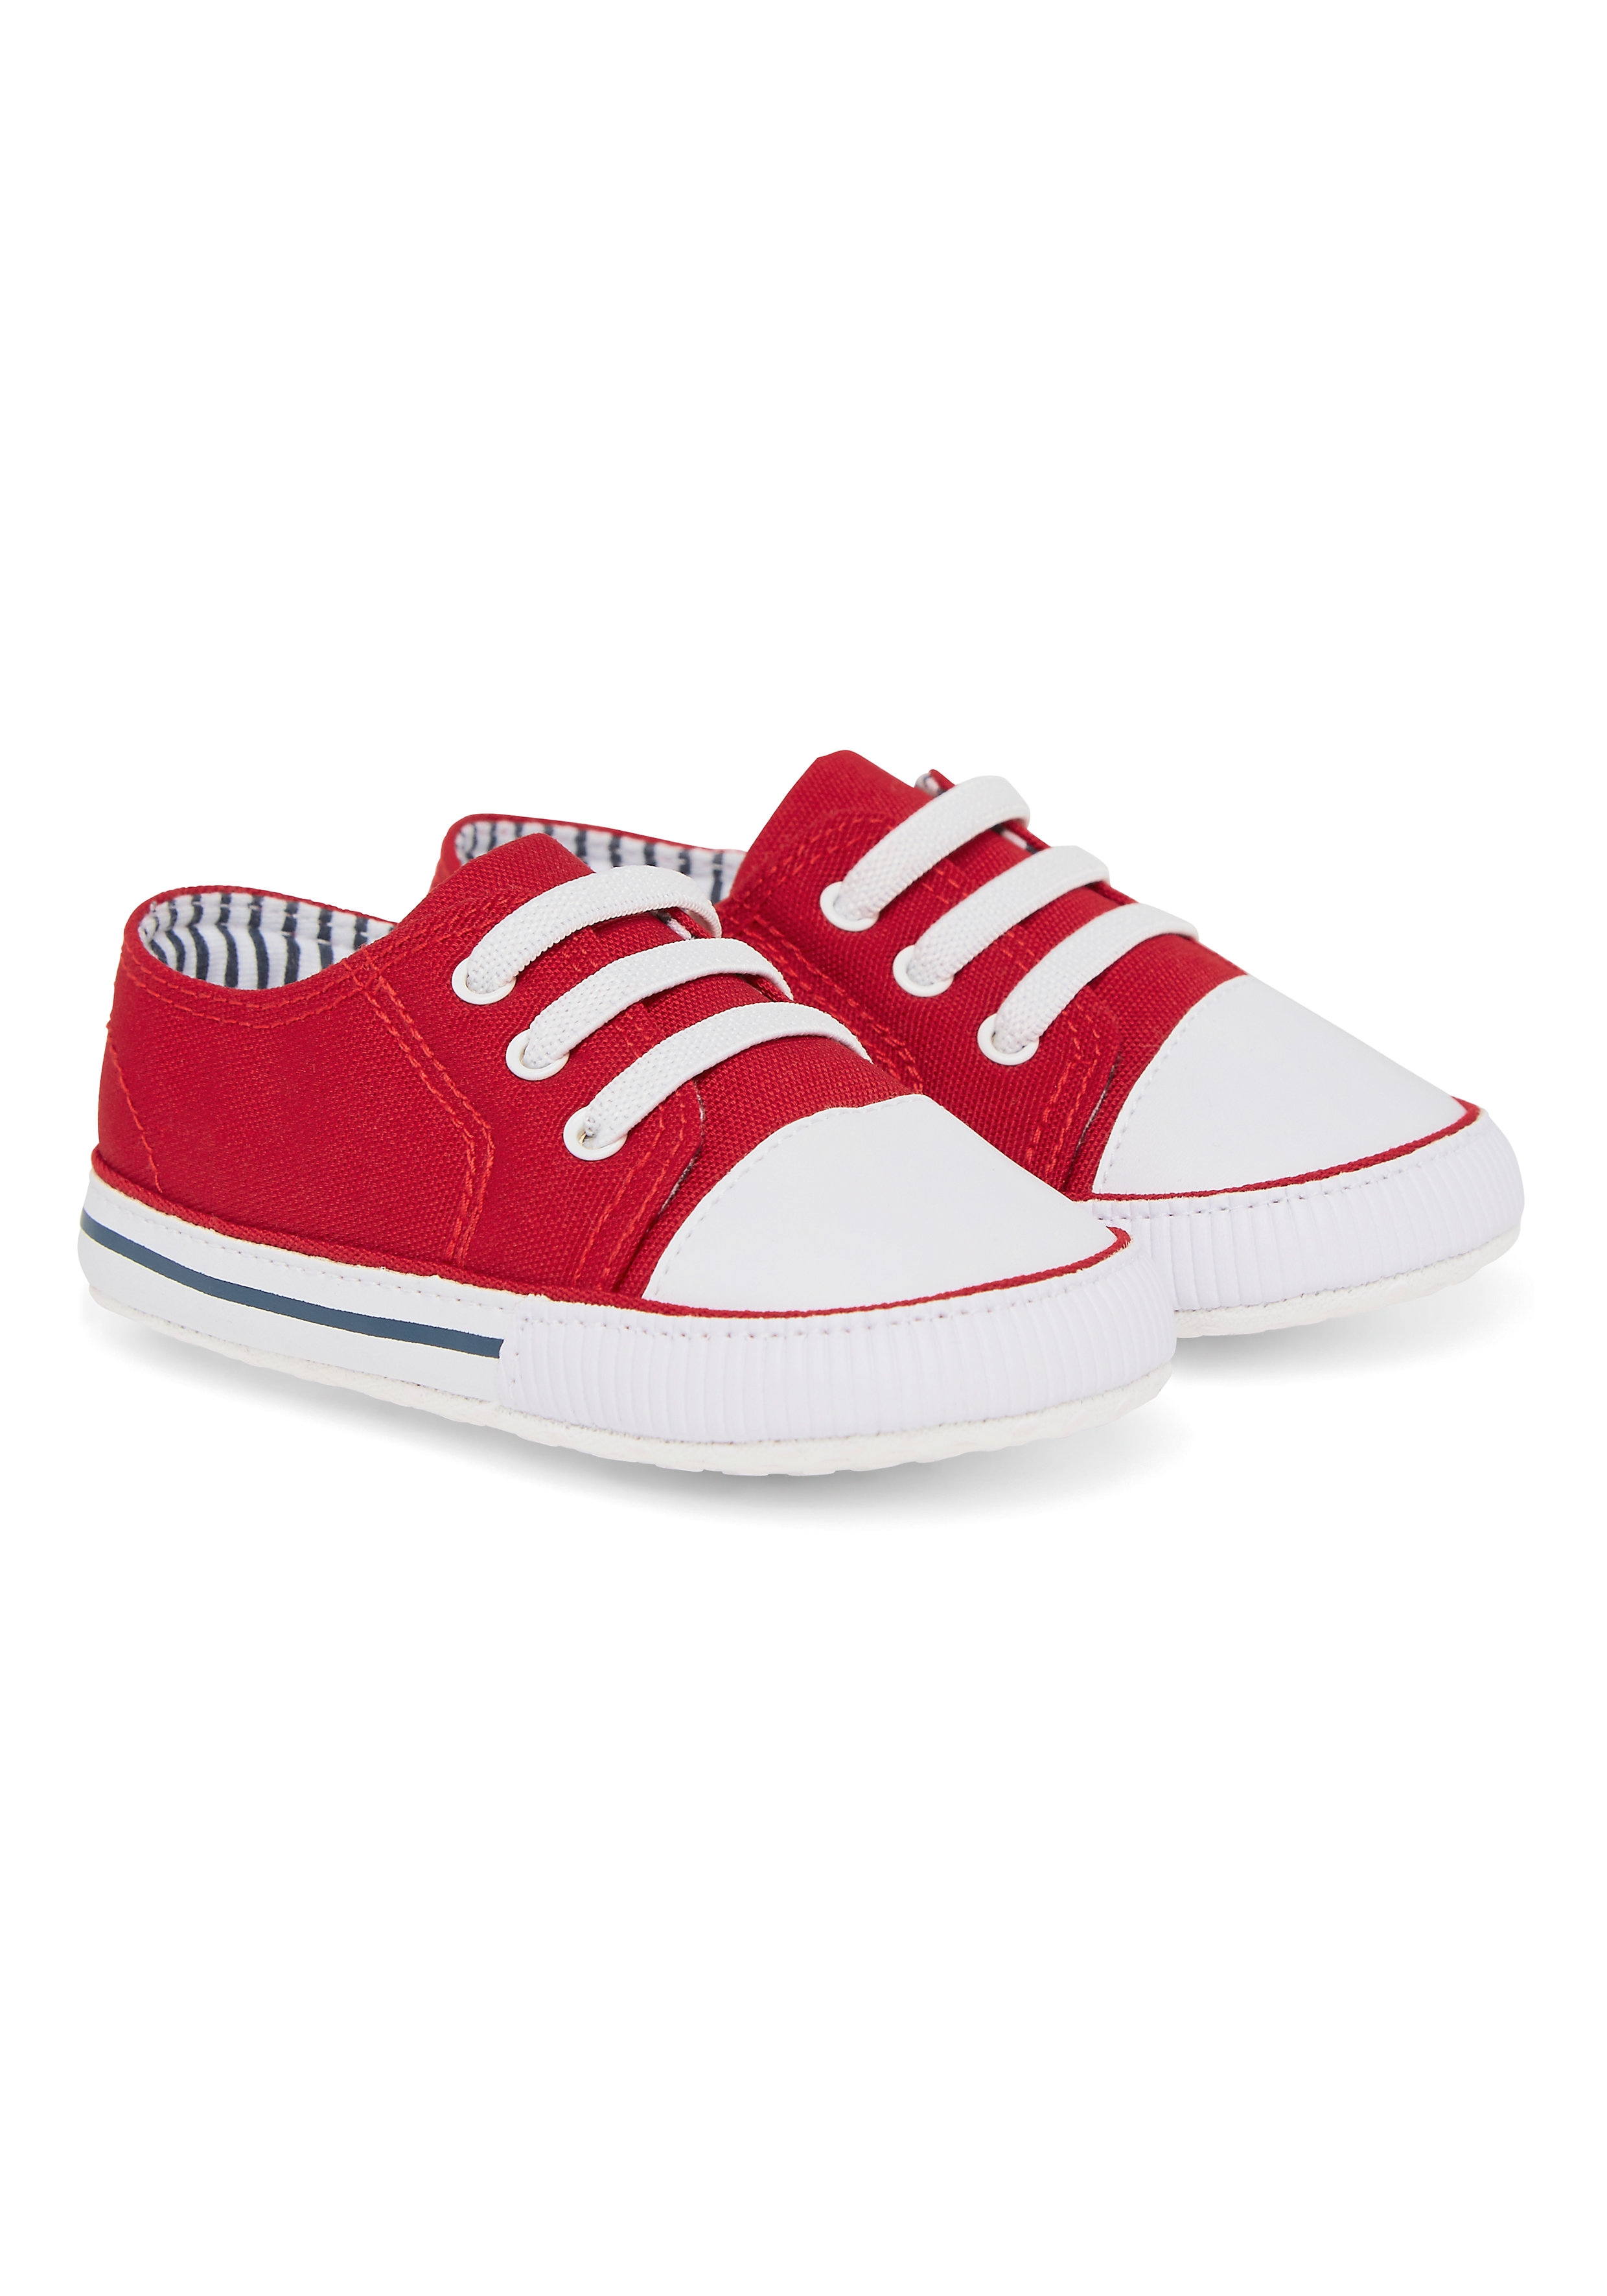 Mothercare | Boys Red Canvas Pram Shoes 0